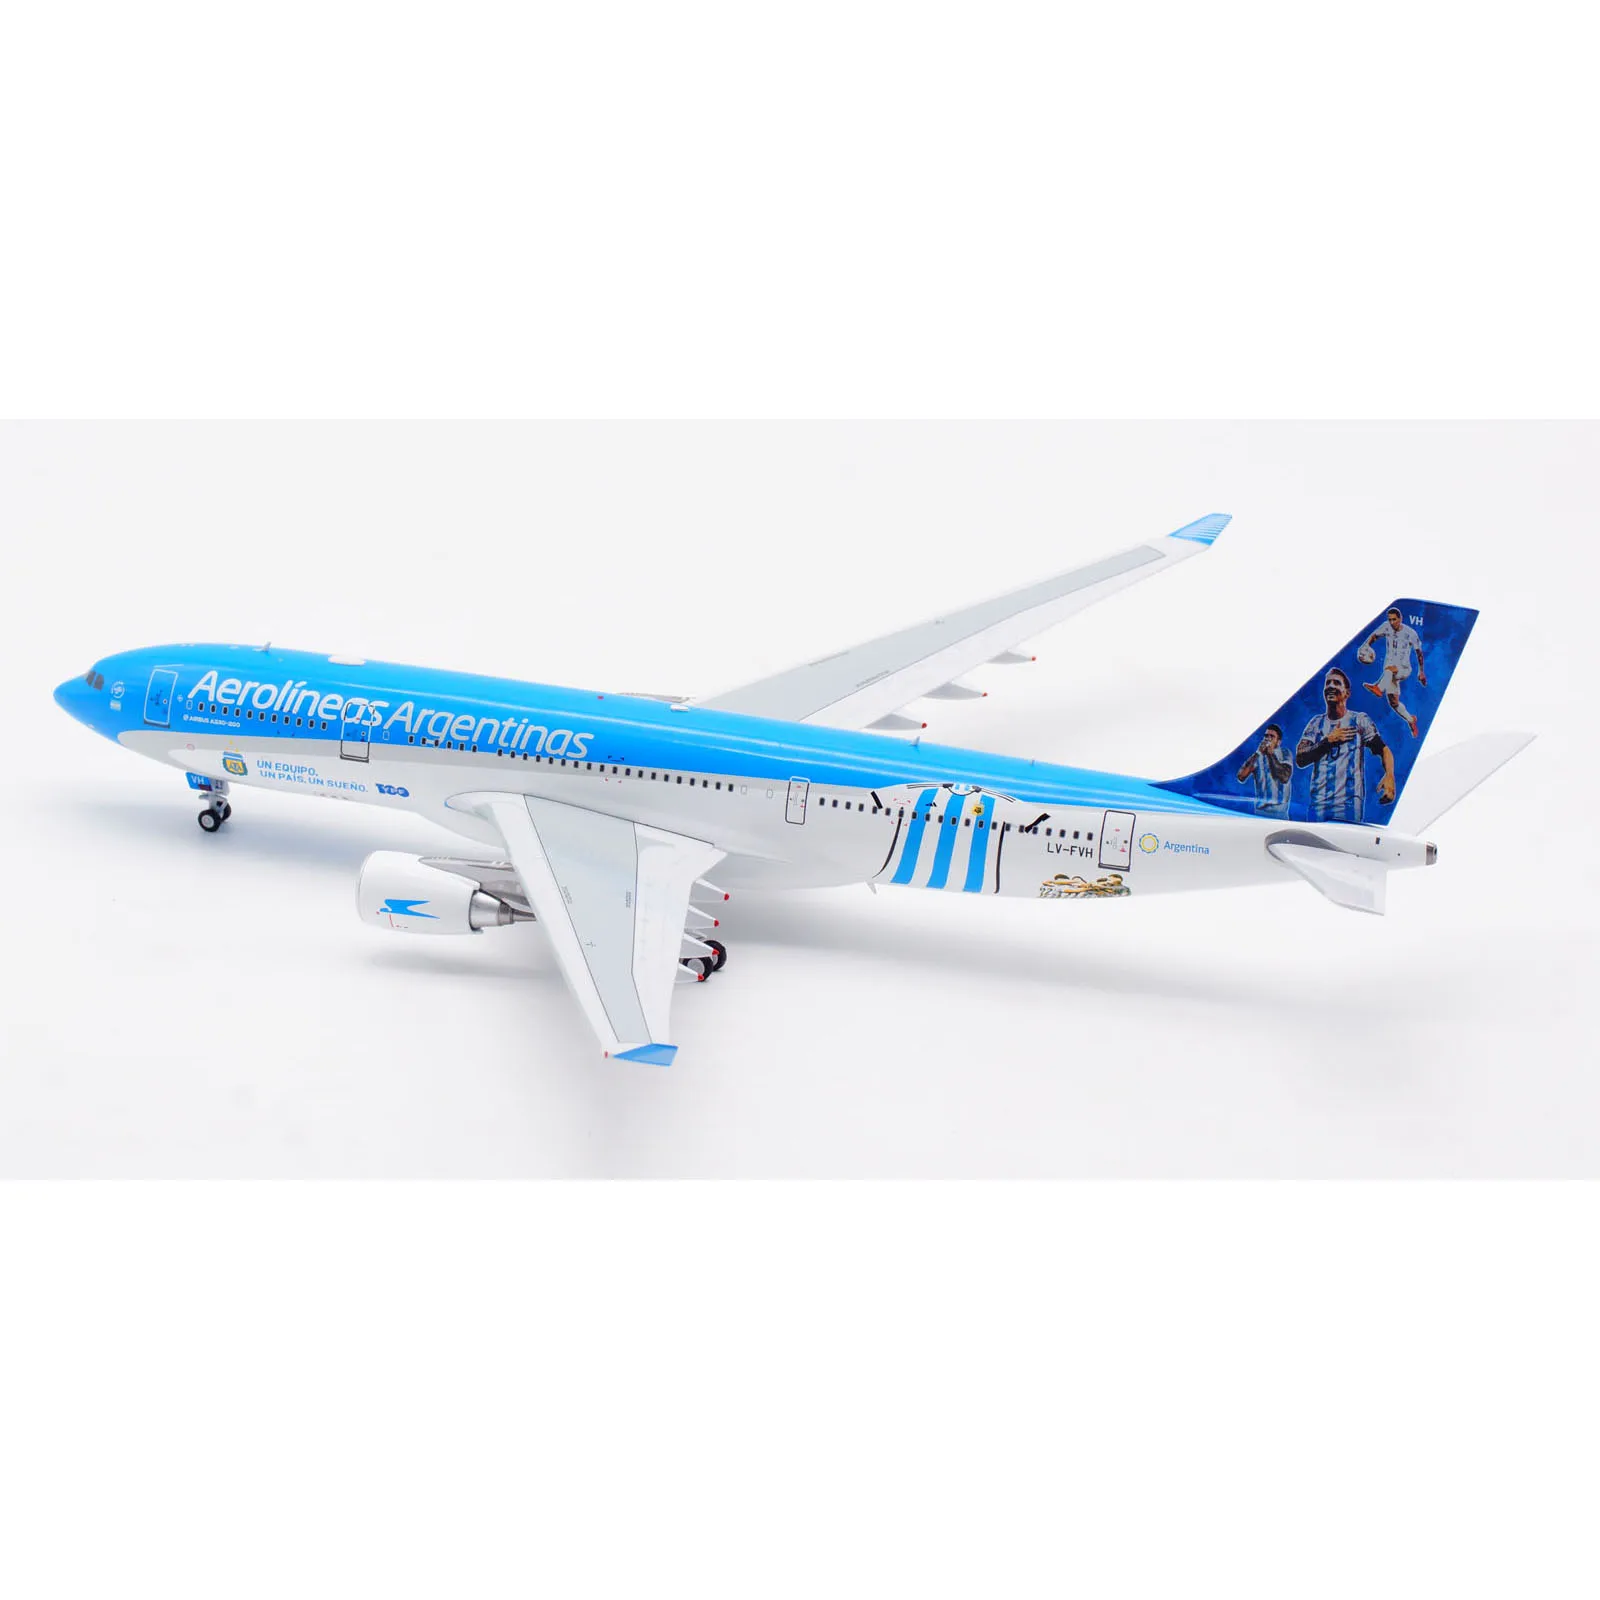 B-332-AR-WC Alloy Collectible Plane Gift B-Models 1:200 Aerolíneas Argentinas A330-200 Diecast Aircraft Jet Model LV-FVH images - 6